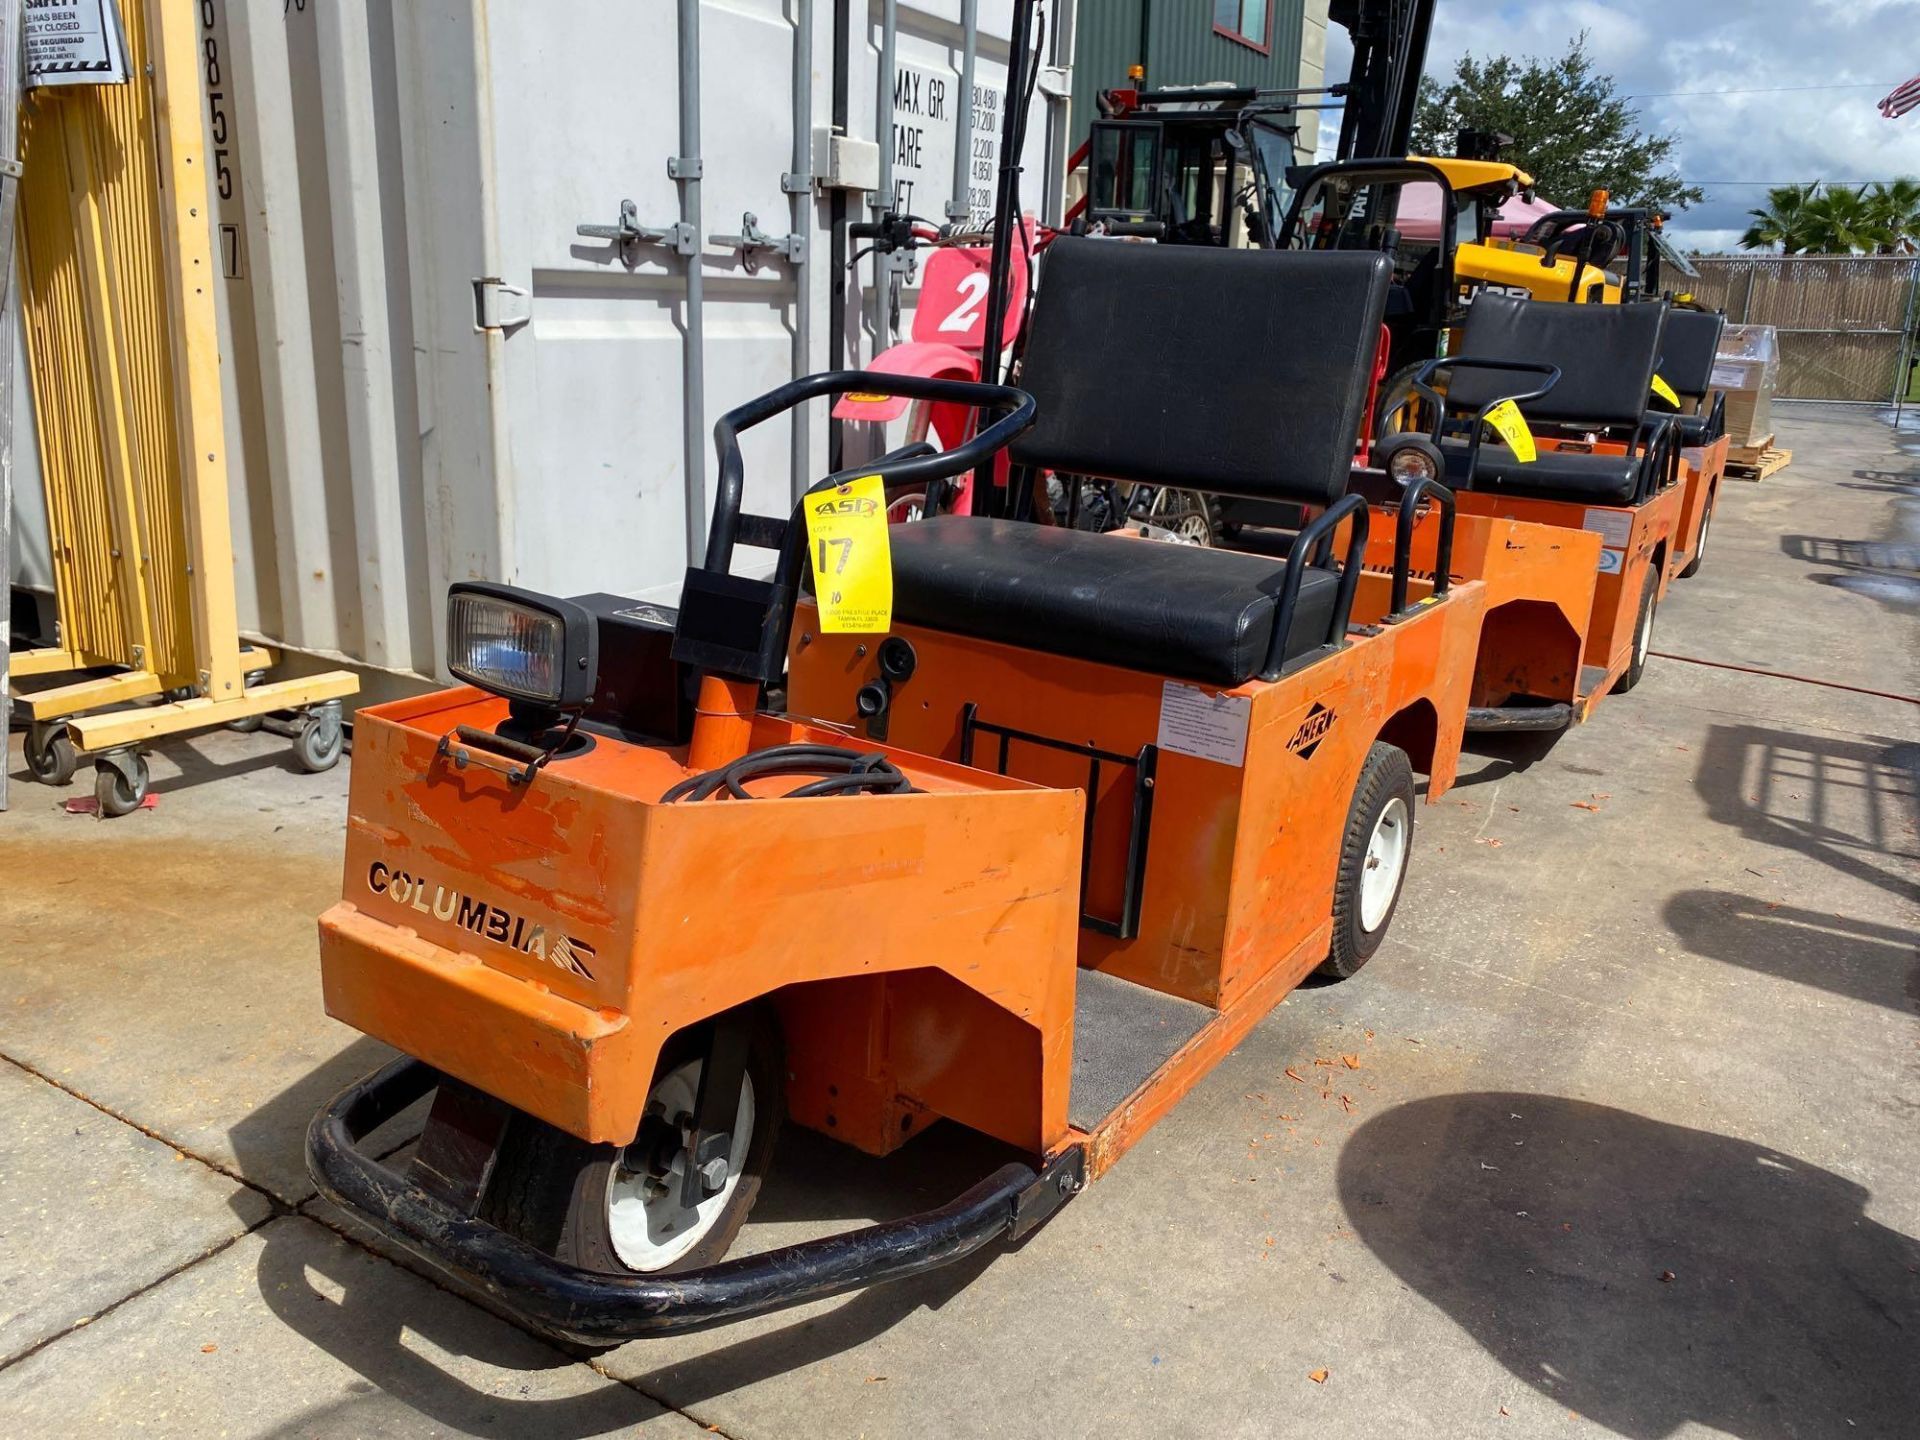 COLUMBIA ELECTRIC SHOP CART, BUILT IN BATTERY CHARGER, RUNS AND OPERATES